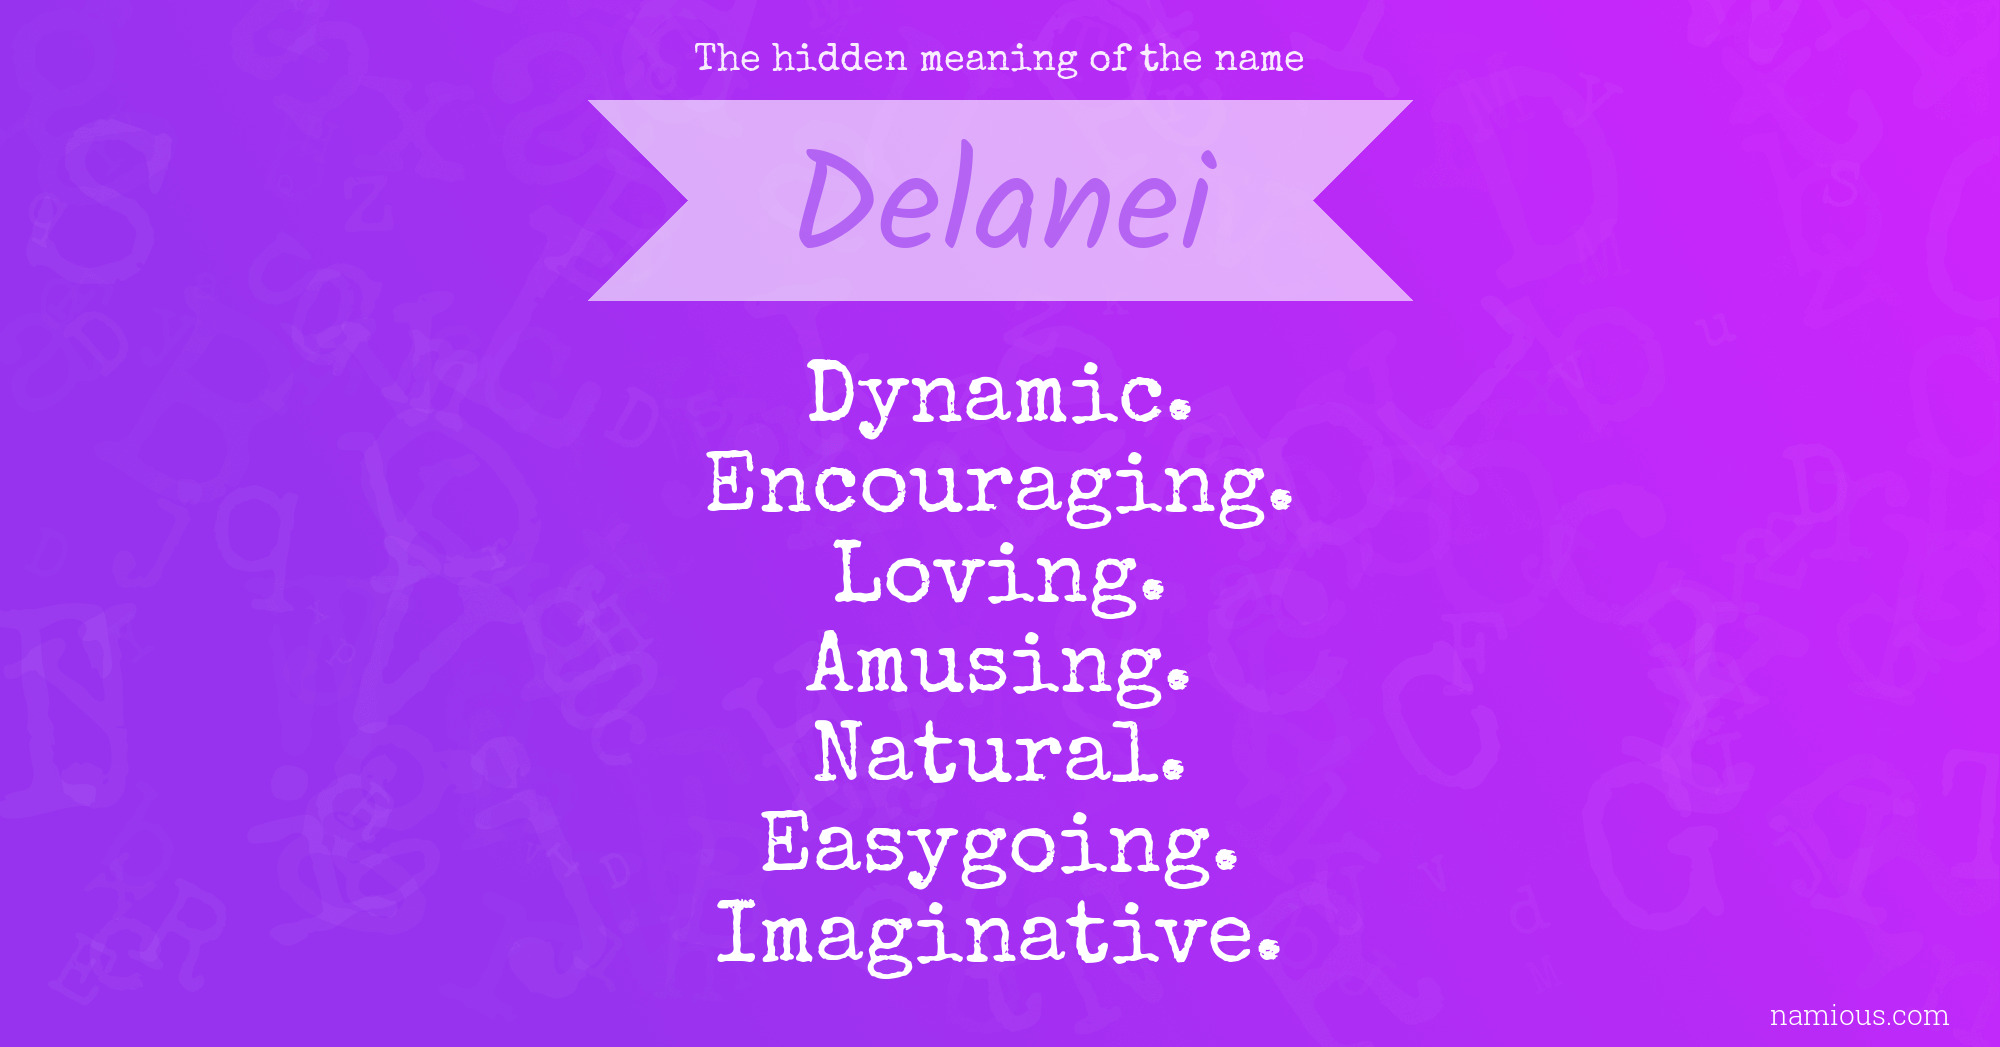 The hidden meaning of the name Delanei